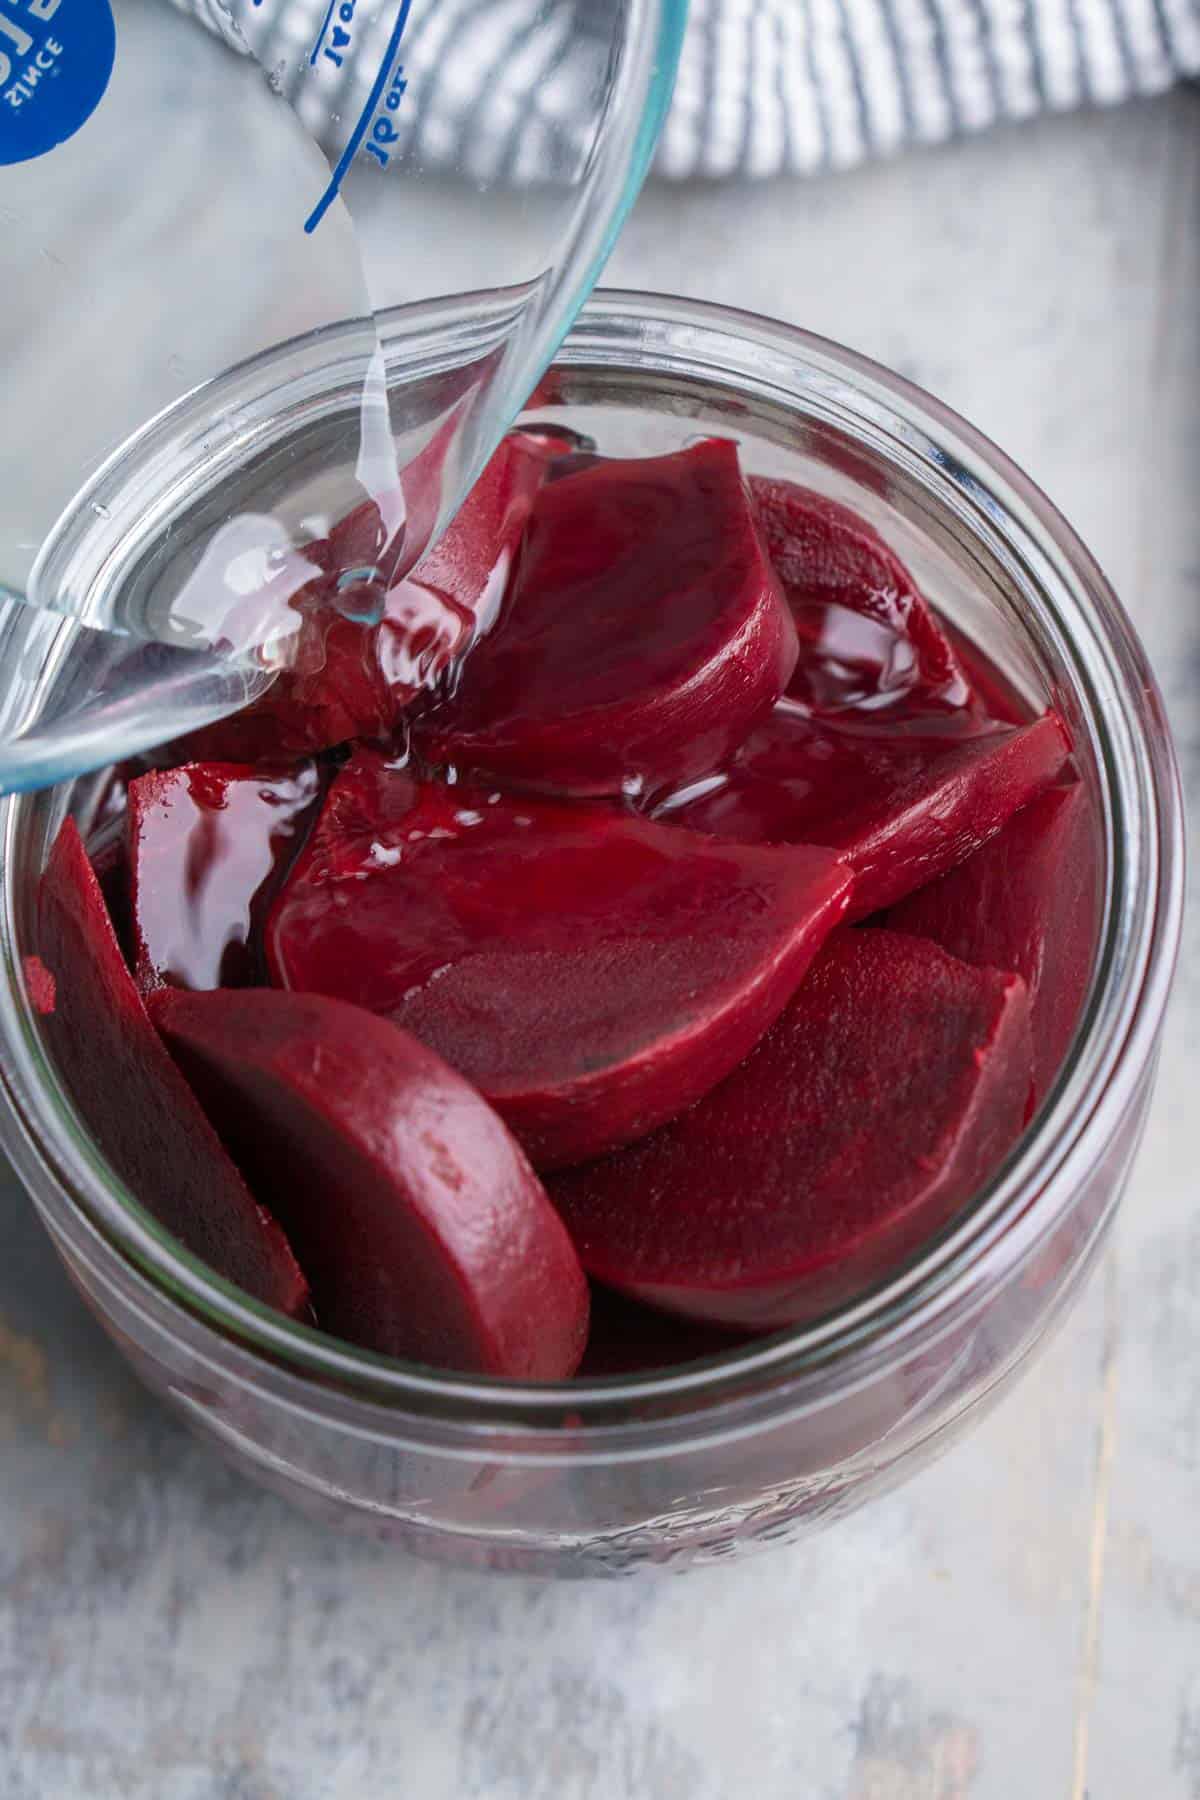 pickling brine is added to cooked sliced red beets in glass jar